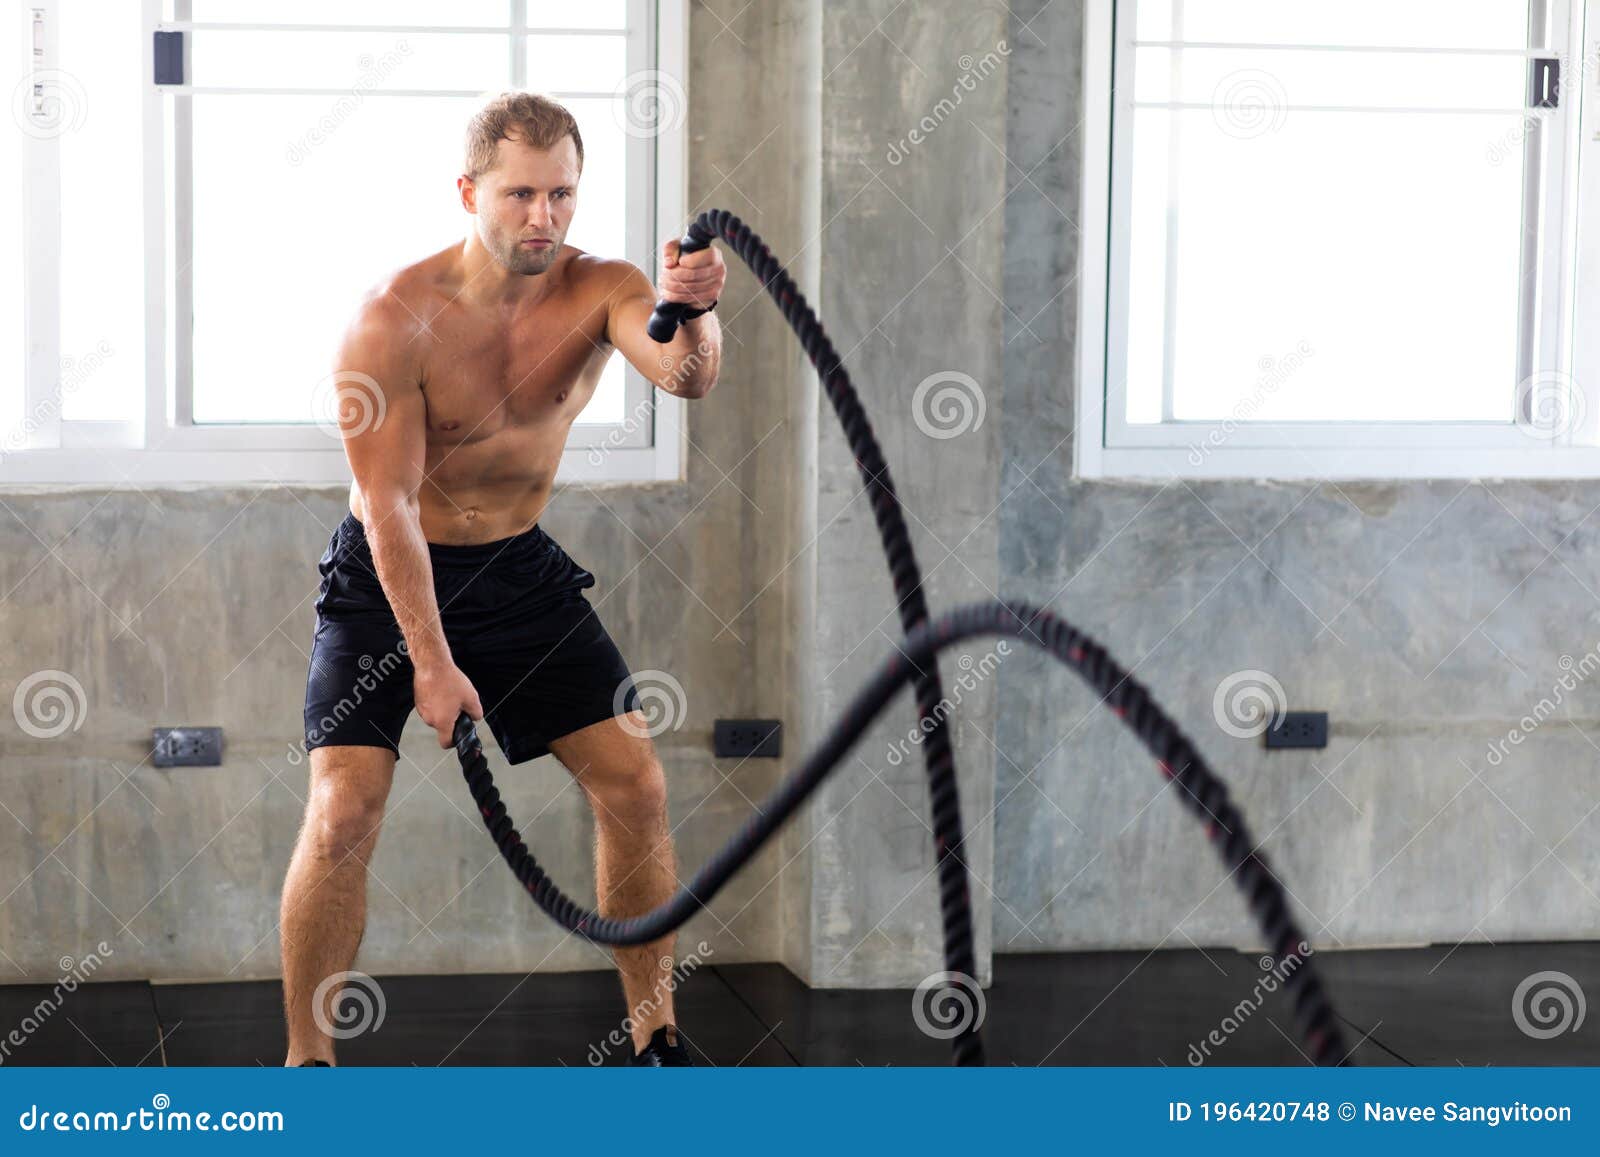 fitness and sports man training with battle rope in cross fit gym. fitness healthy lifestye and workout at gym concept